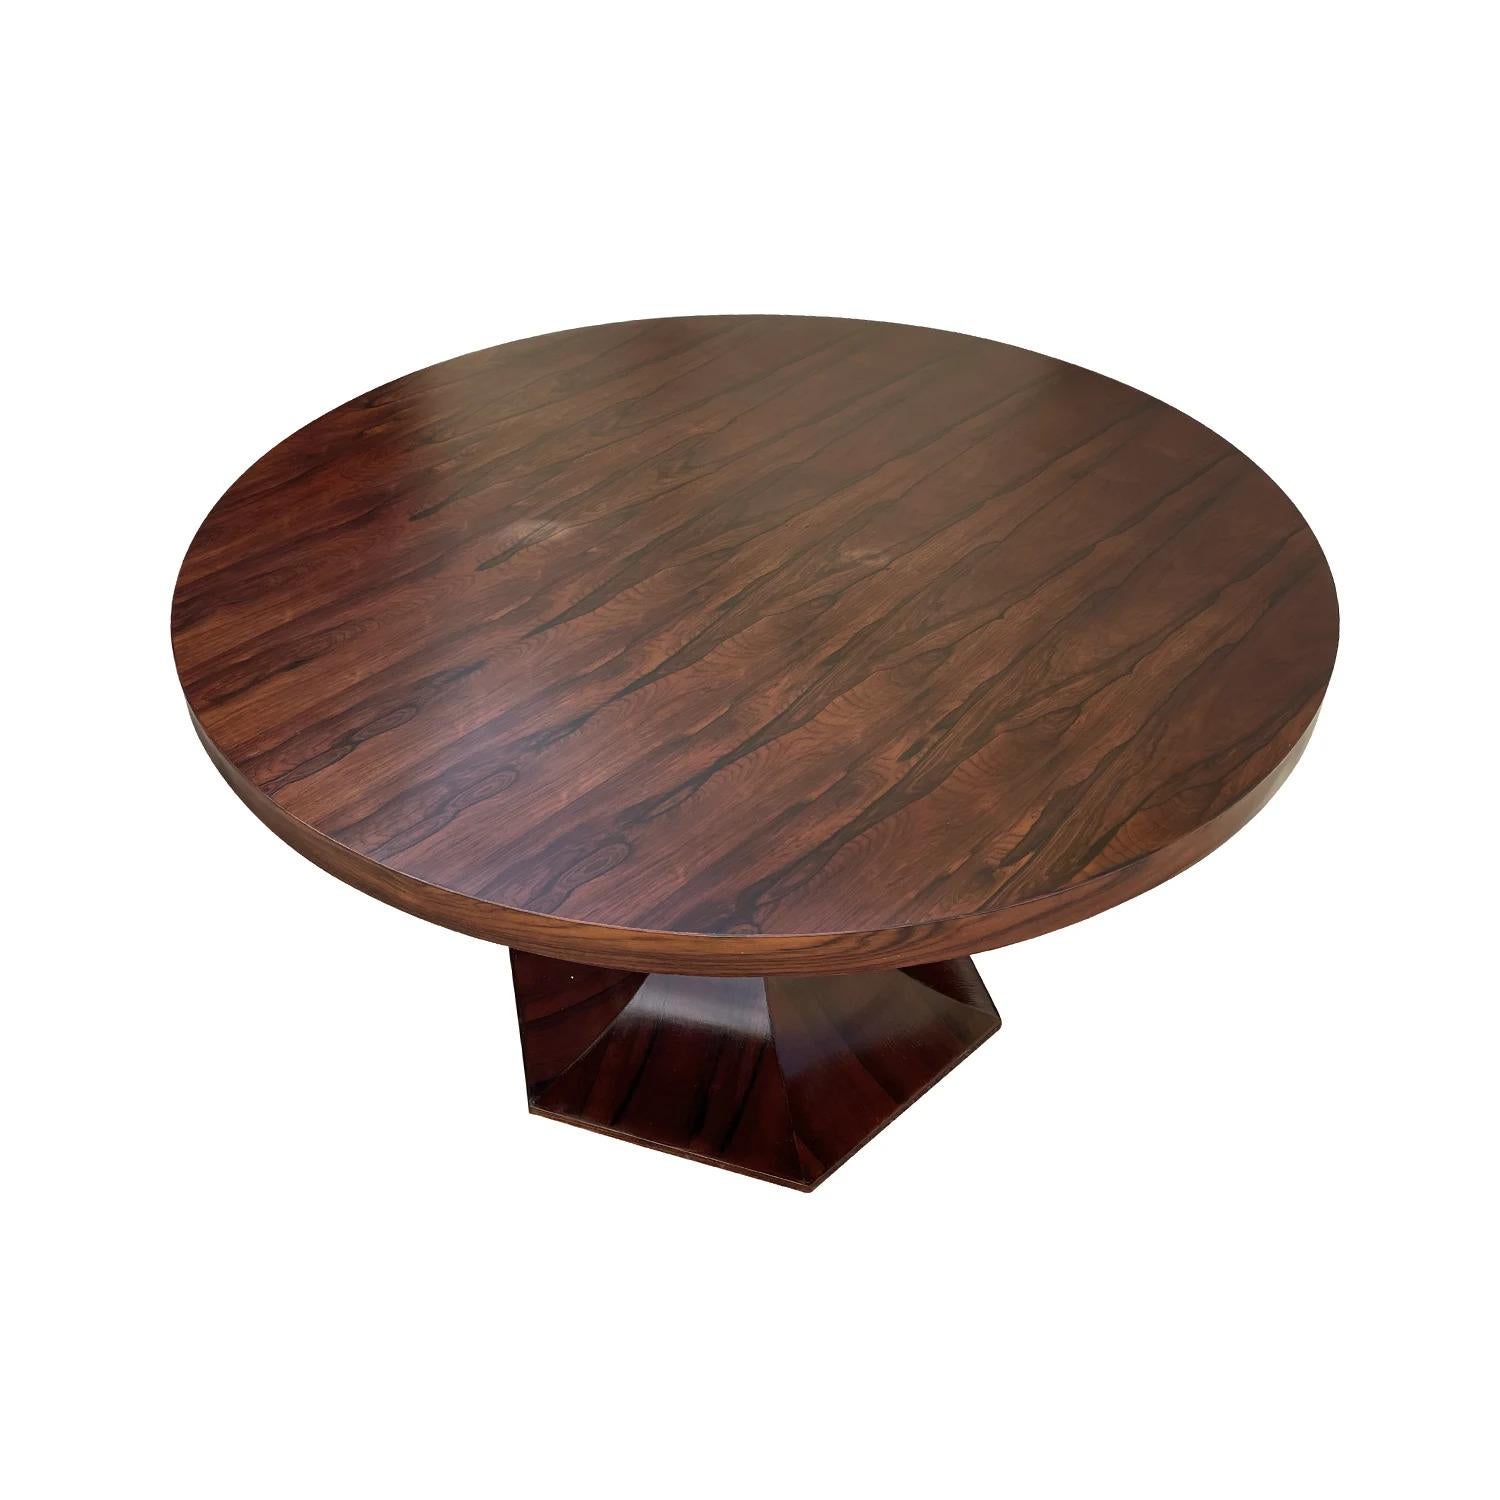 20th Century Italian Modern Vintage Polished Rosewood Dining, Center Table For Sale 2